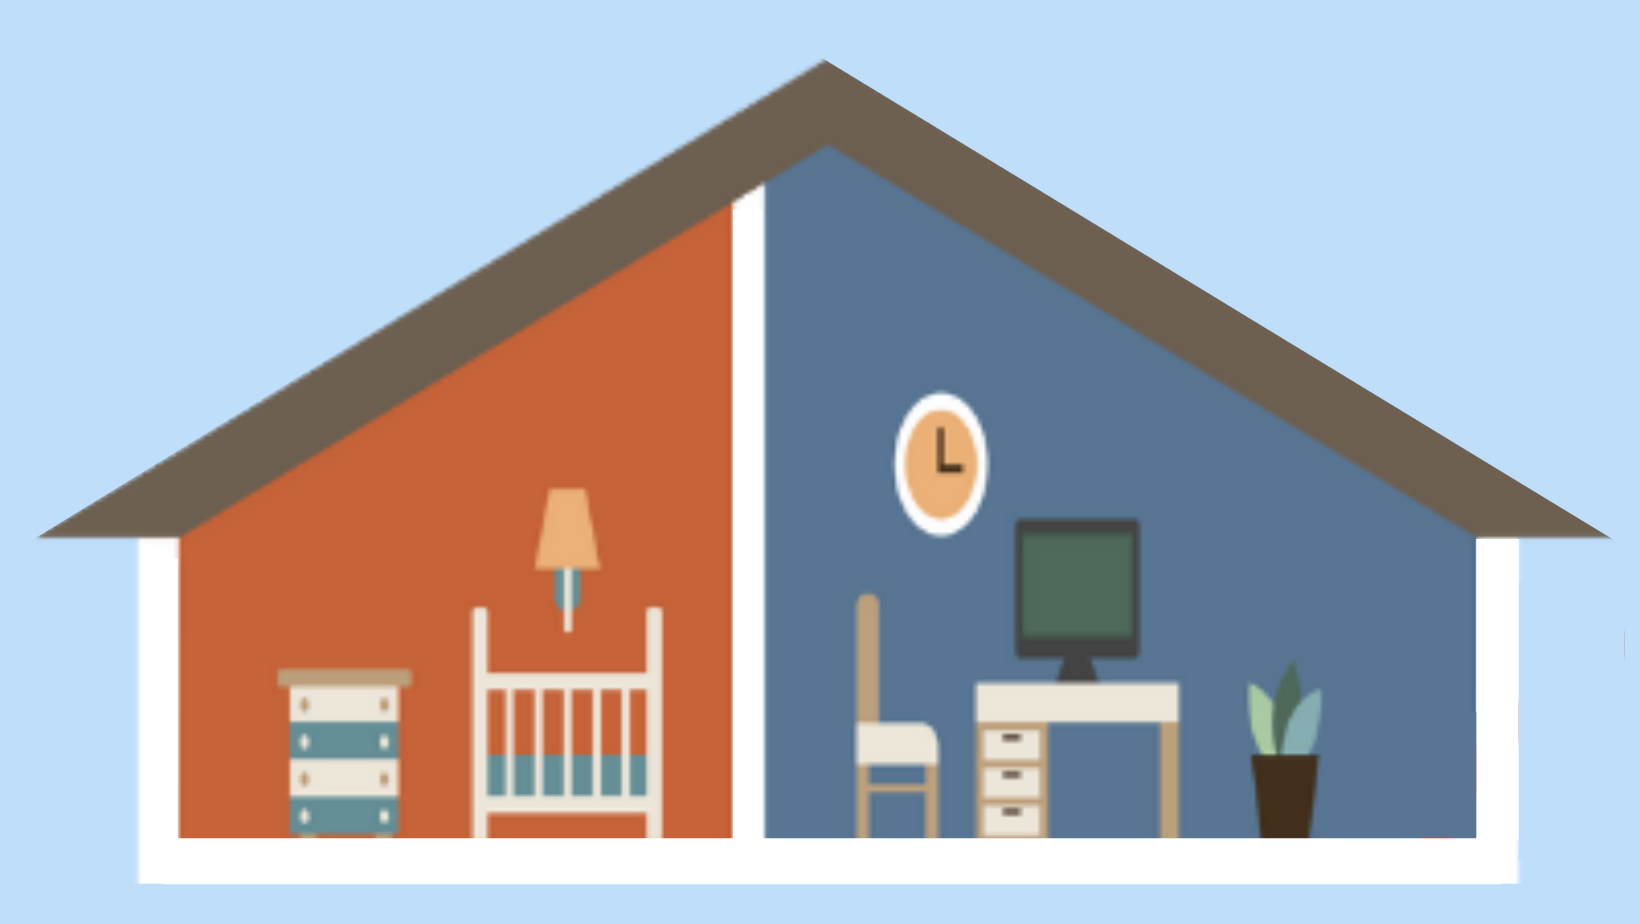 INFOGRAPHIC: Fall Hazards In The Home